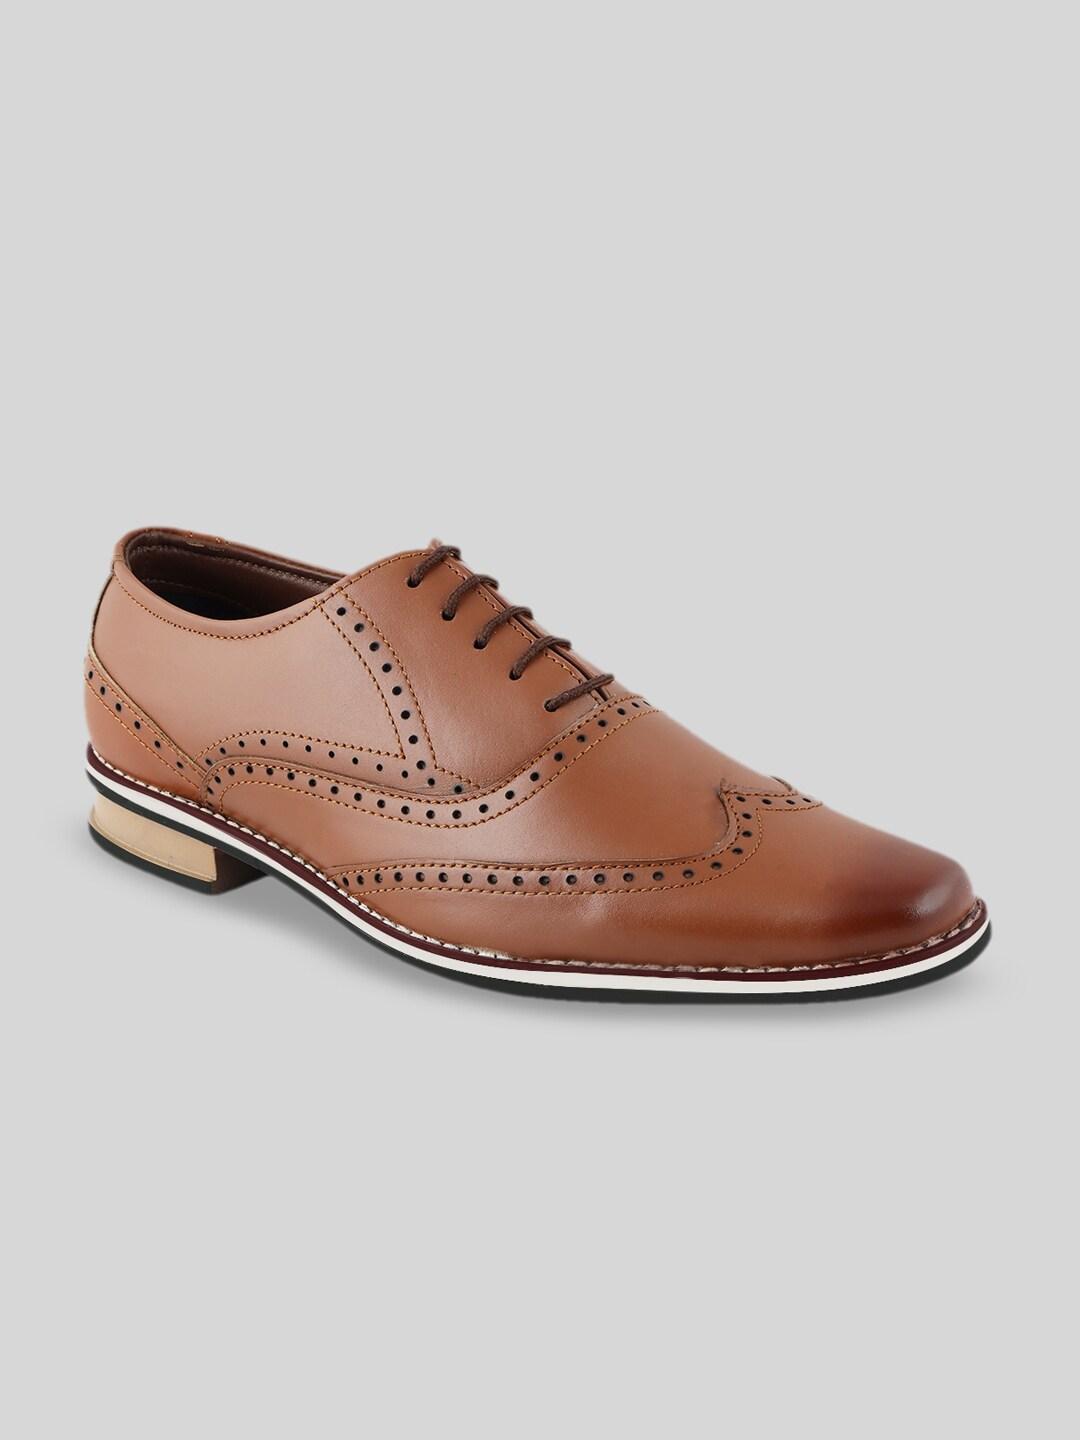 WELBAWT Men Leather Formal Brogues Shoes